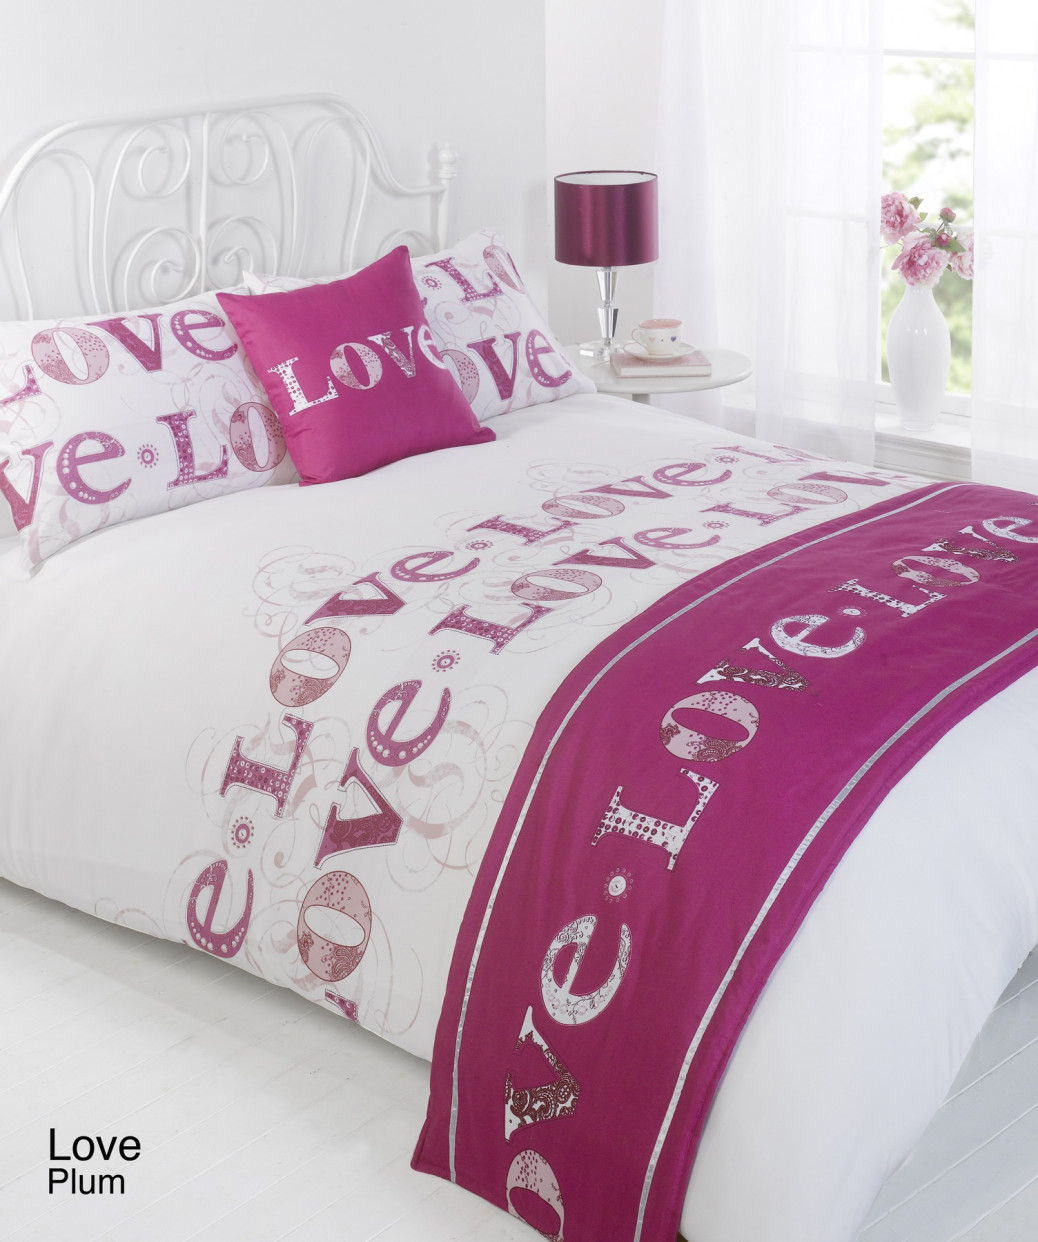 Love Bed In A Bag Duvet Double Cover Set - Plum>